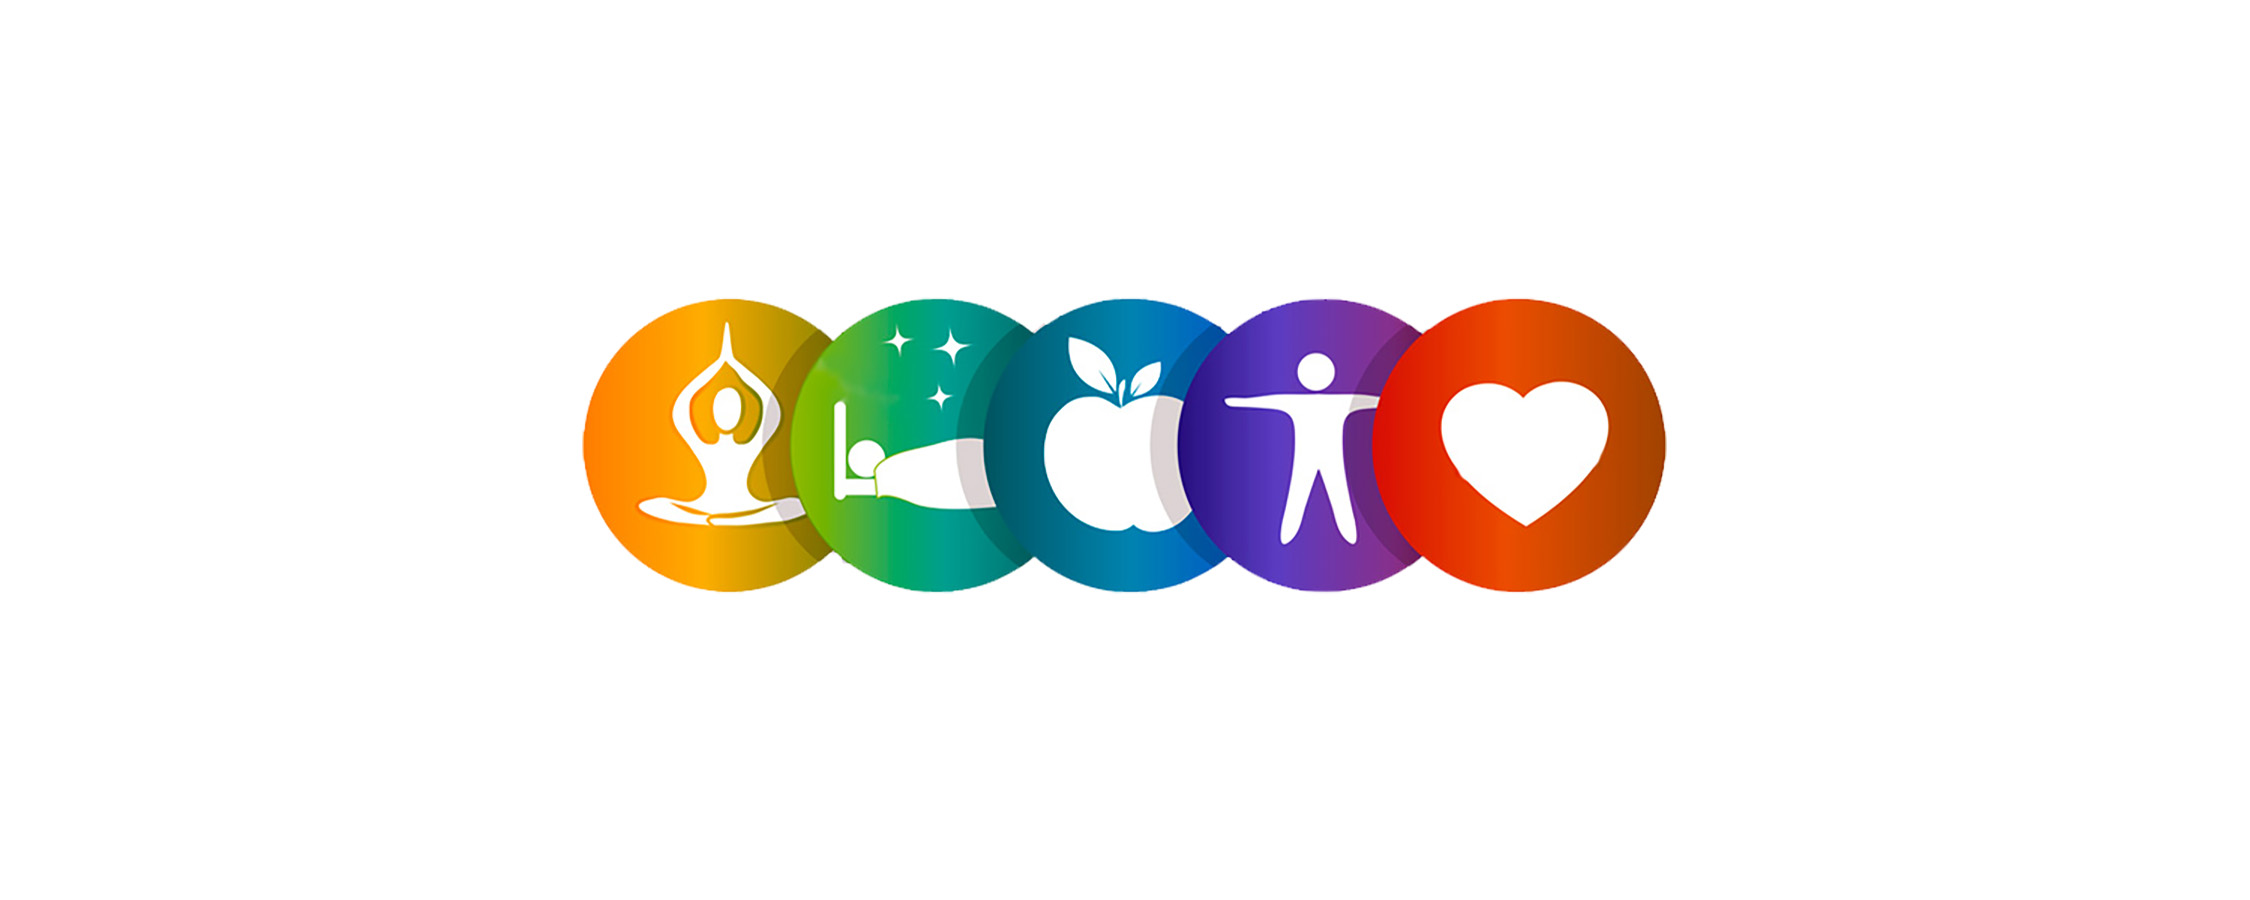 Worksite wellness logo. Multi-colored circles with wellness icons in them in white